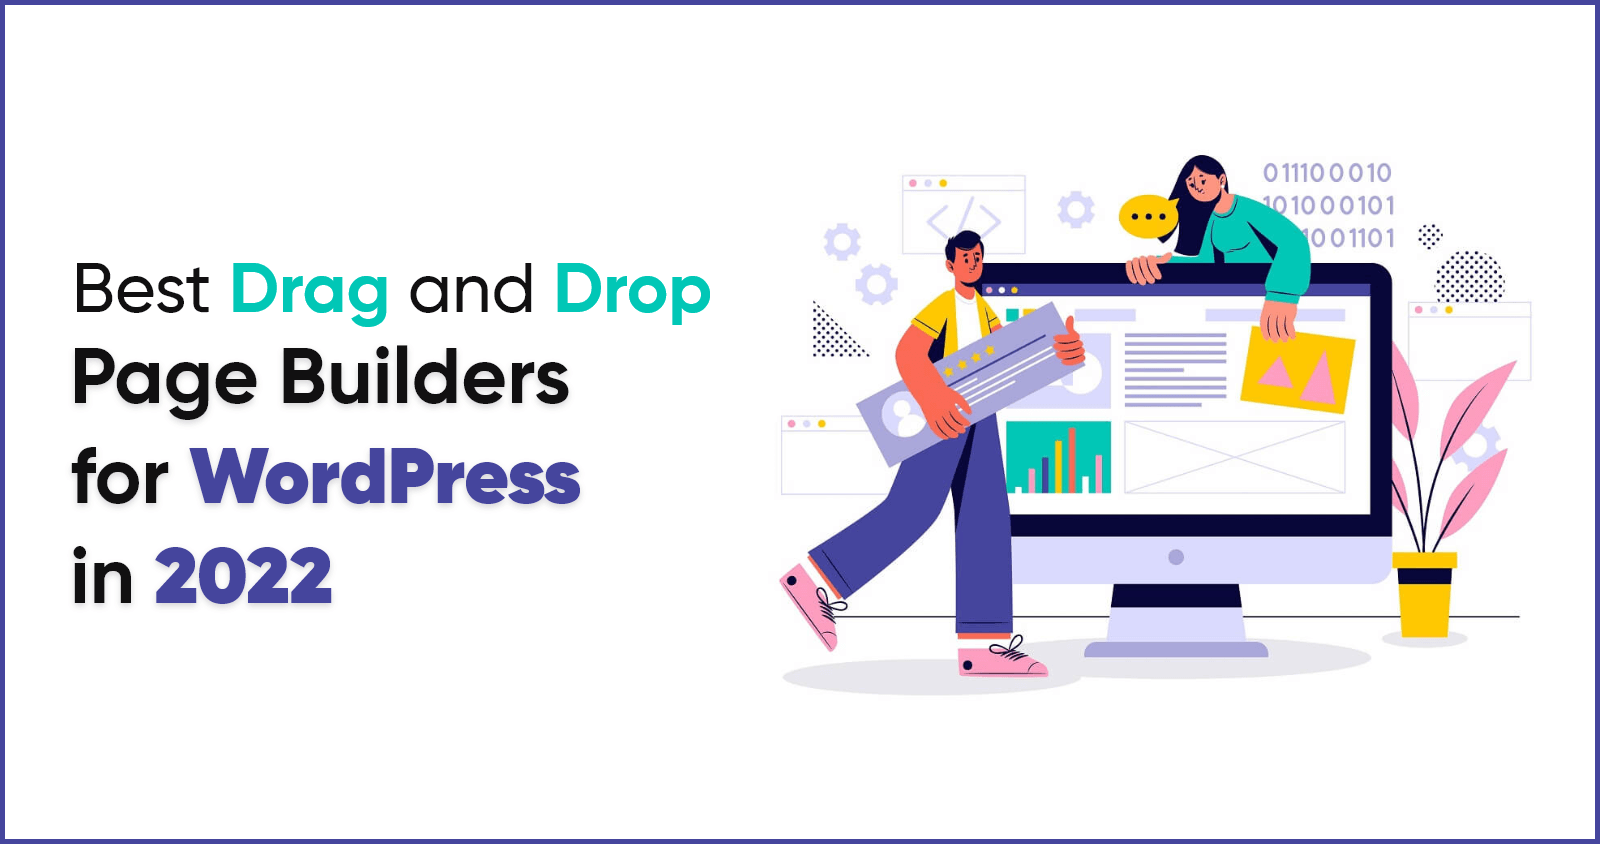 Best Drag and Drop Page Builders for WordPress in 2022